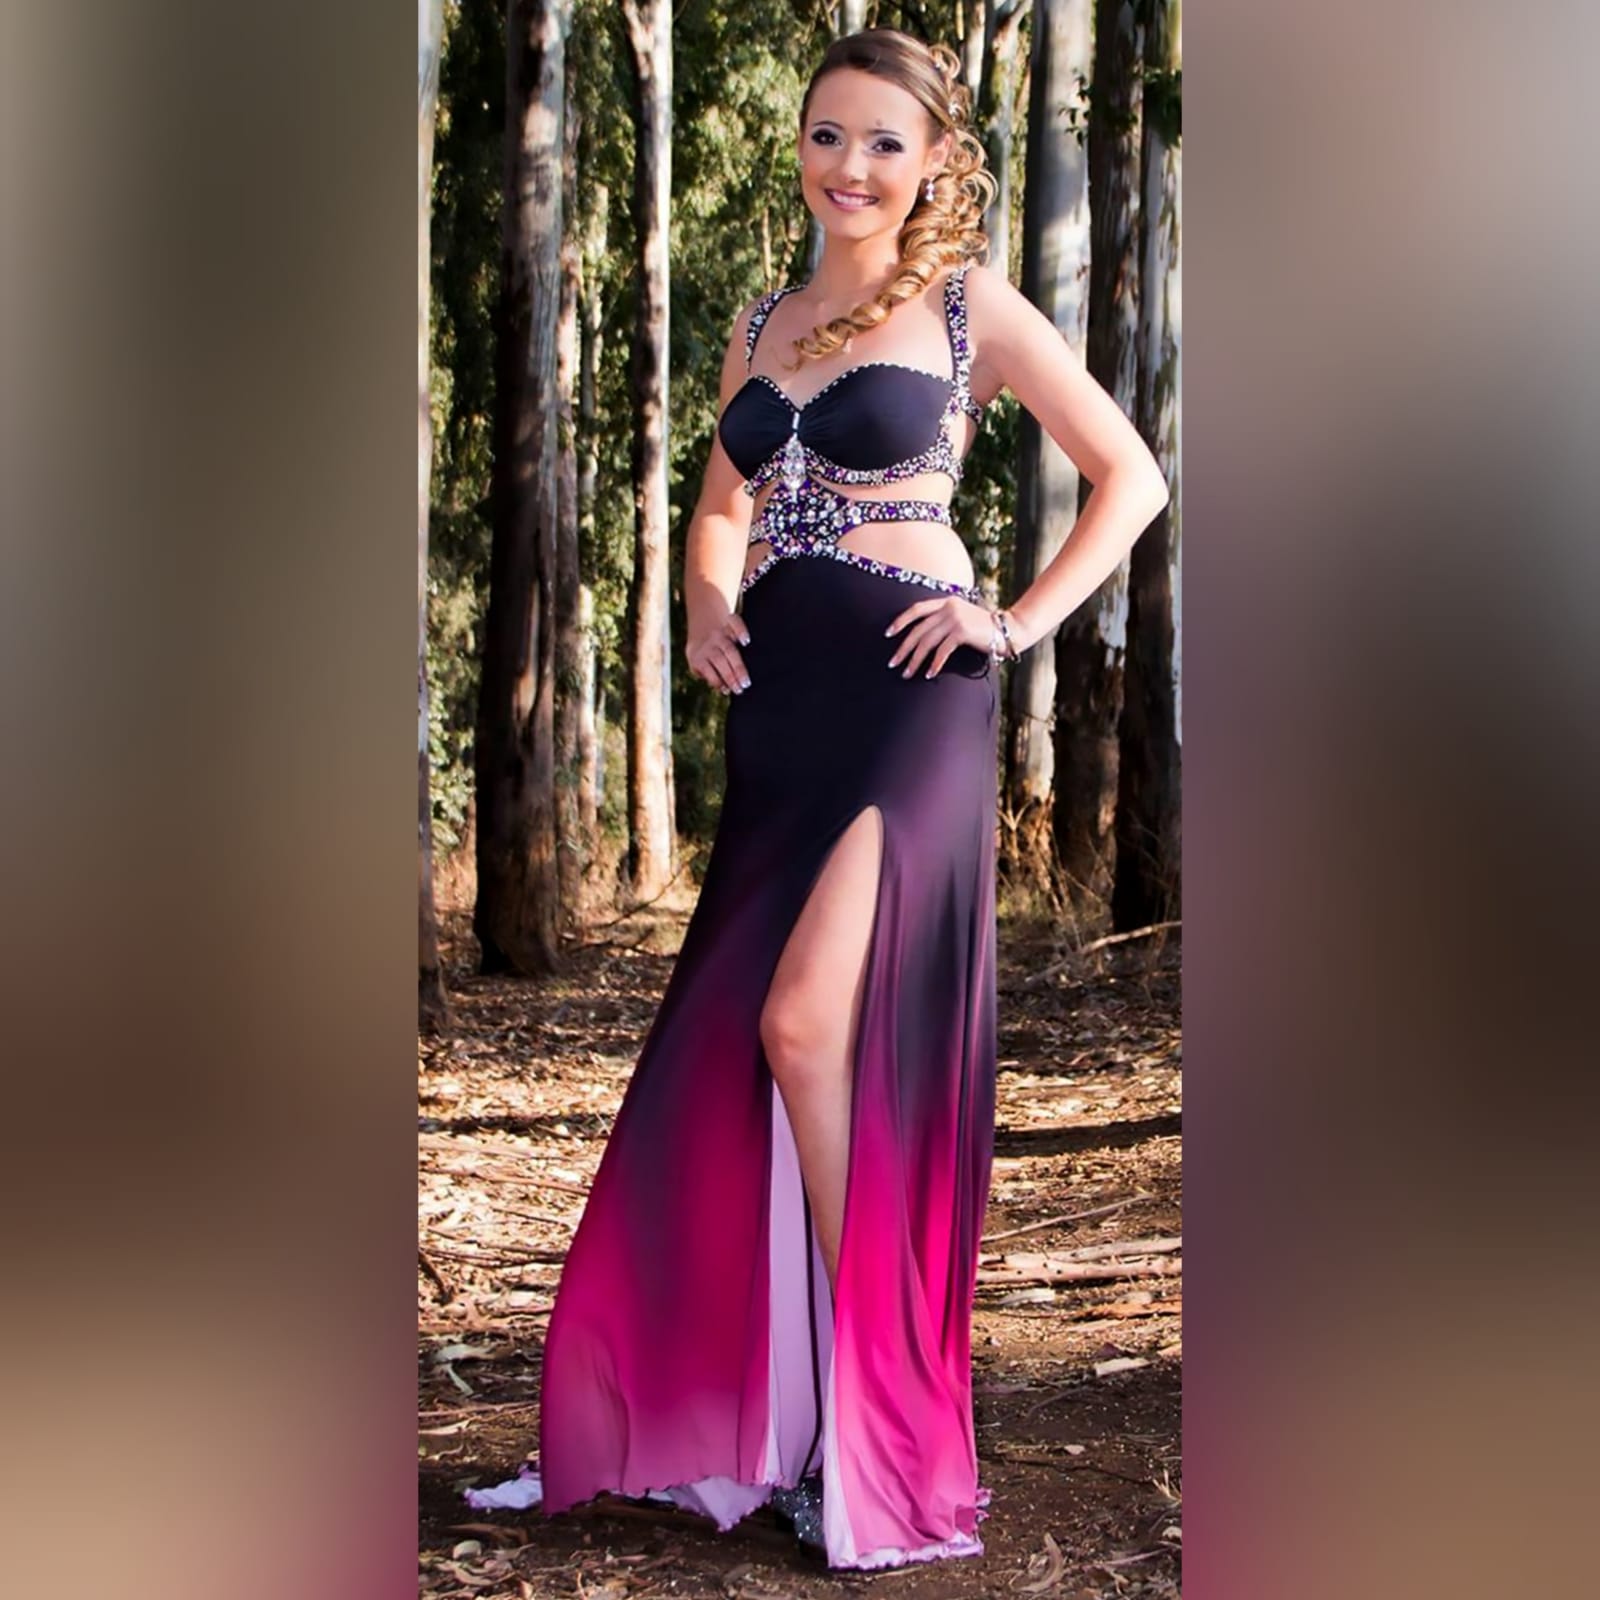 Black pink ombre sexy matric dance dress 7 black and pink ombre sexy matric dance dress. With a slit and a train. With tummy and back openings detailed with silver and pink beads.